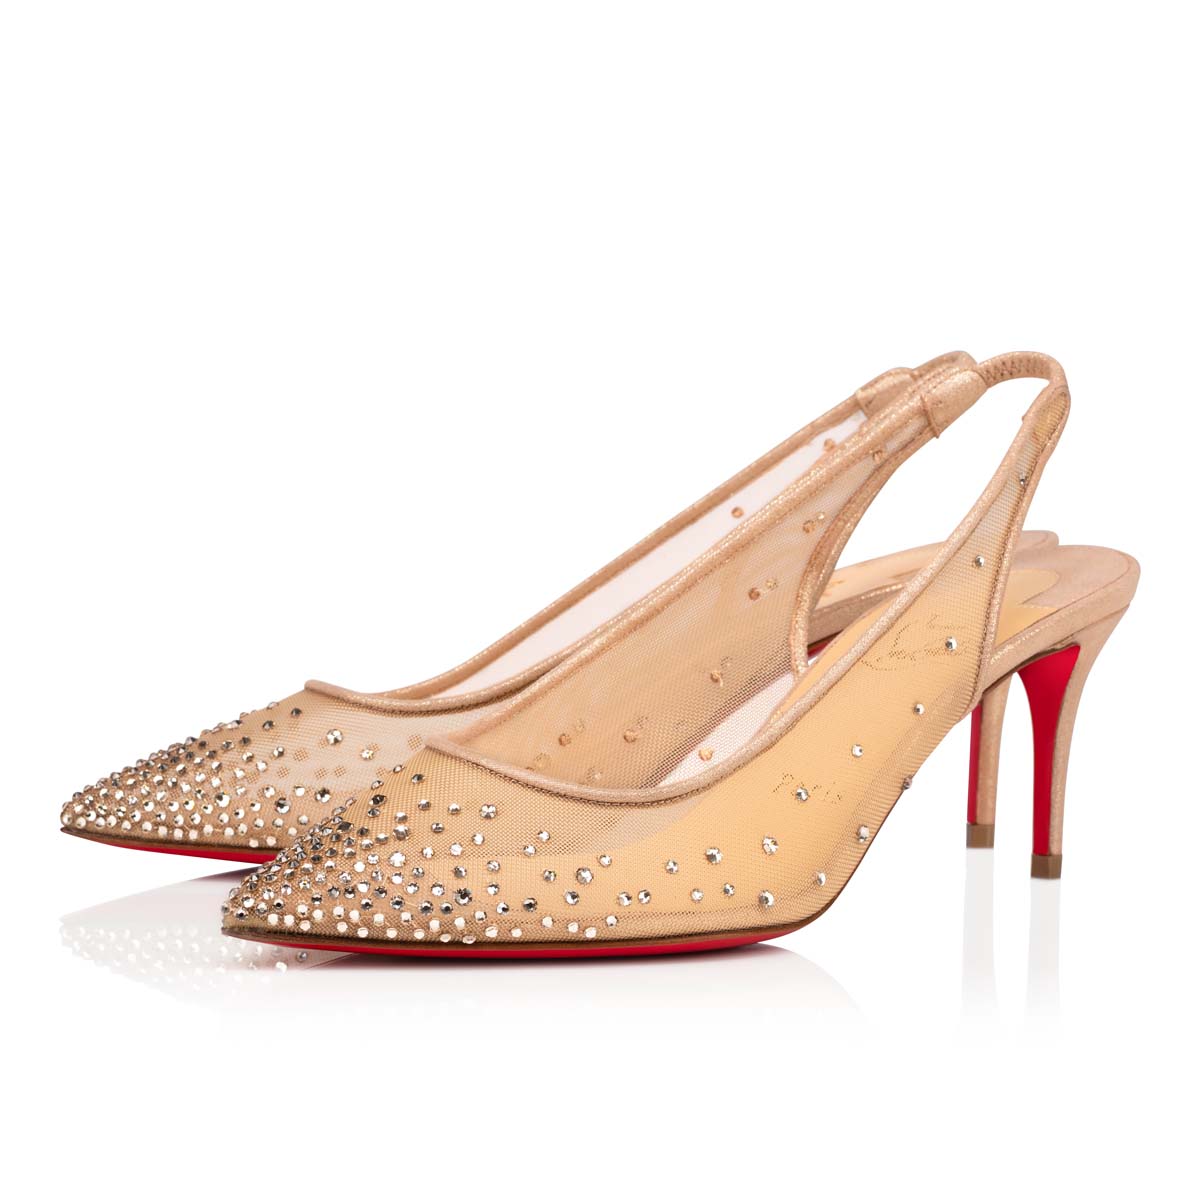 Christian Louboutin Follies Strass Pumps  Unboxing, Trying On & Reviewing  My Dream Wedding Shoes 